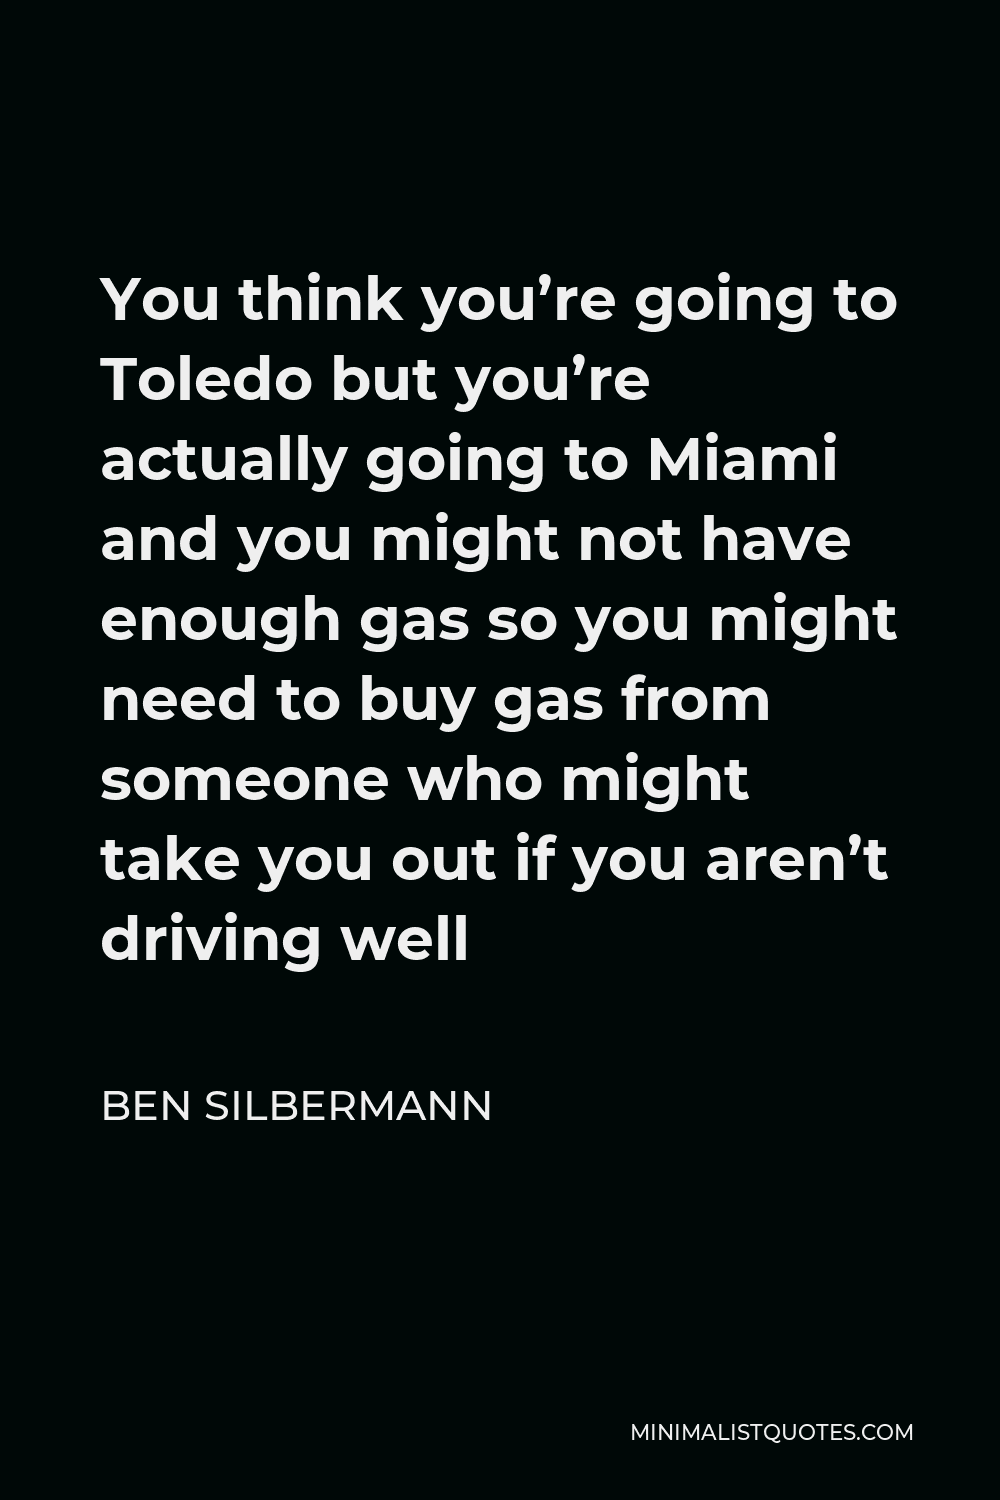 Ben Silbermann Quote - You think you’re going to Toledo but you’re actually going to Miami and you might not have enough gas so you might need to buy gas from someone who might take you out if you aren’t driving well